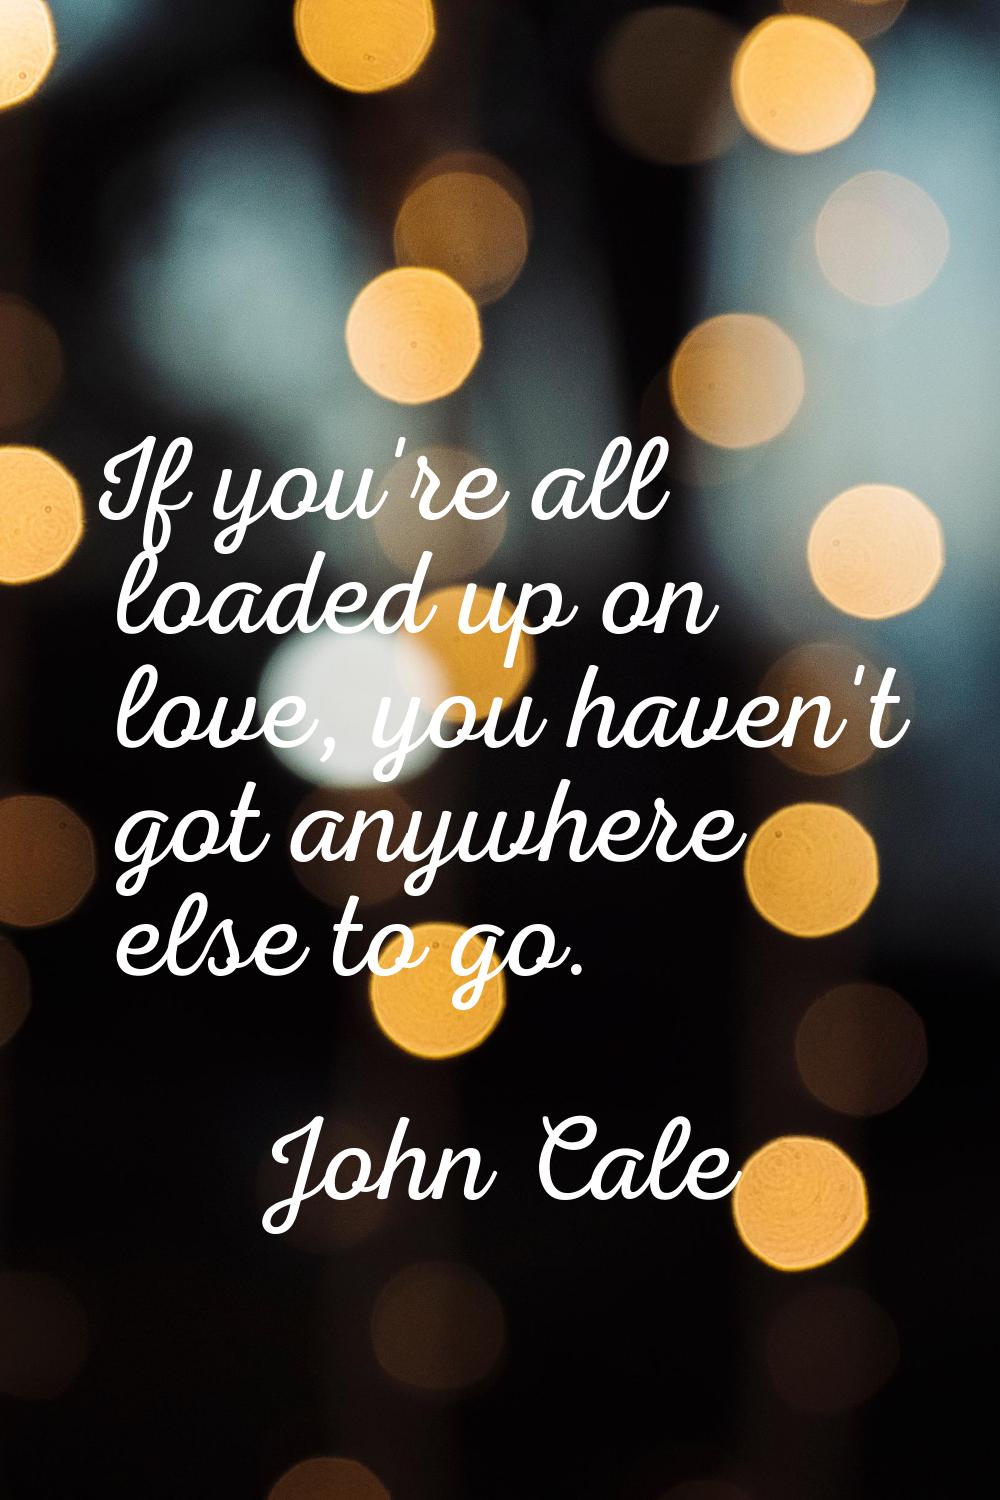 If you're all loaded up on love, you haven't got anywhere else to go.